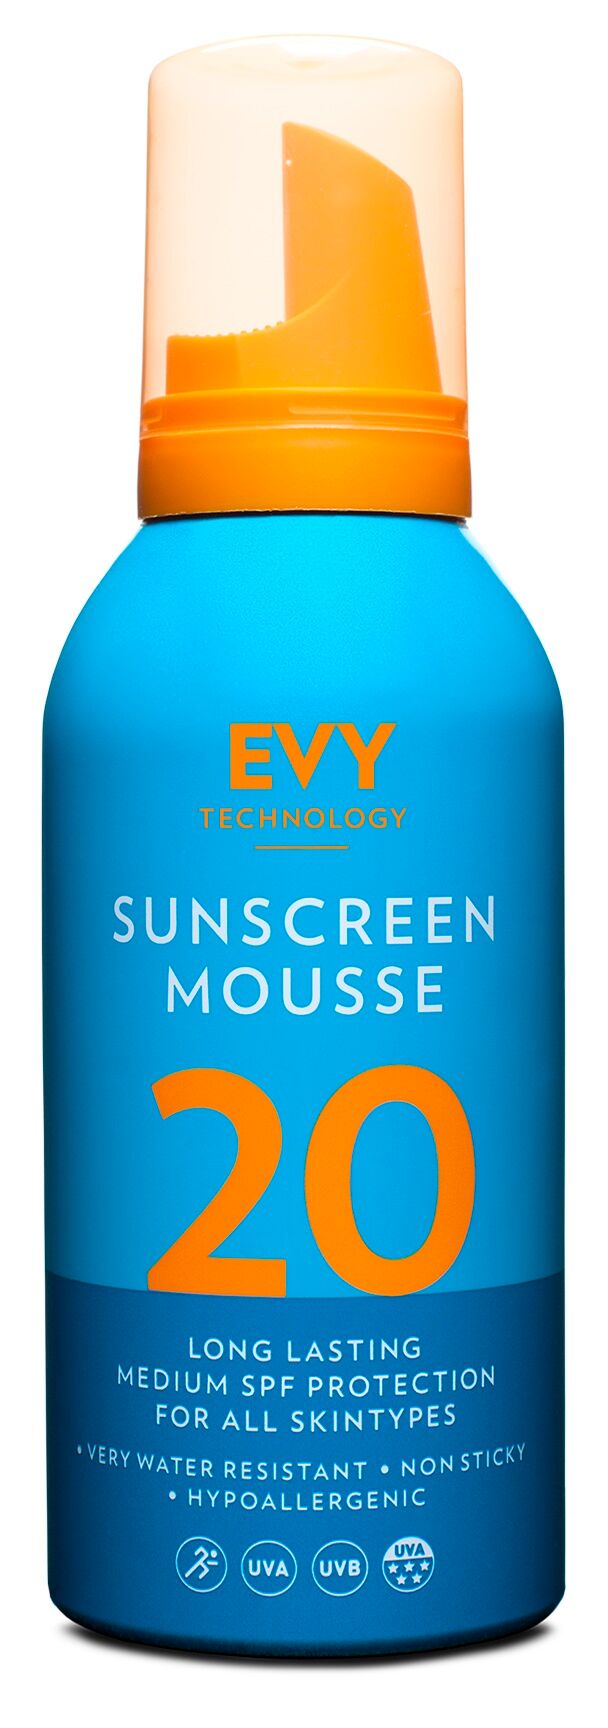 EVY Technology EVY Sunscreen Mousse Spf 20 - 20 SPF - 150 ml